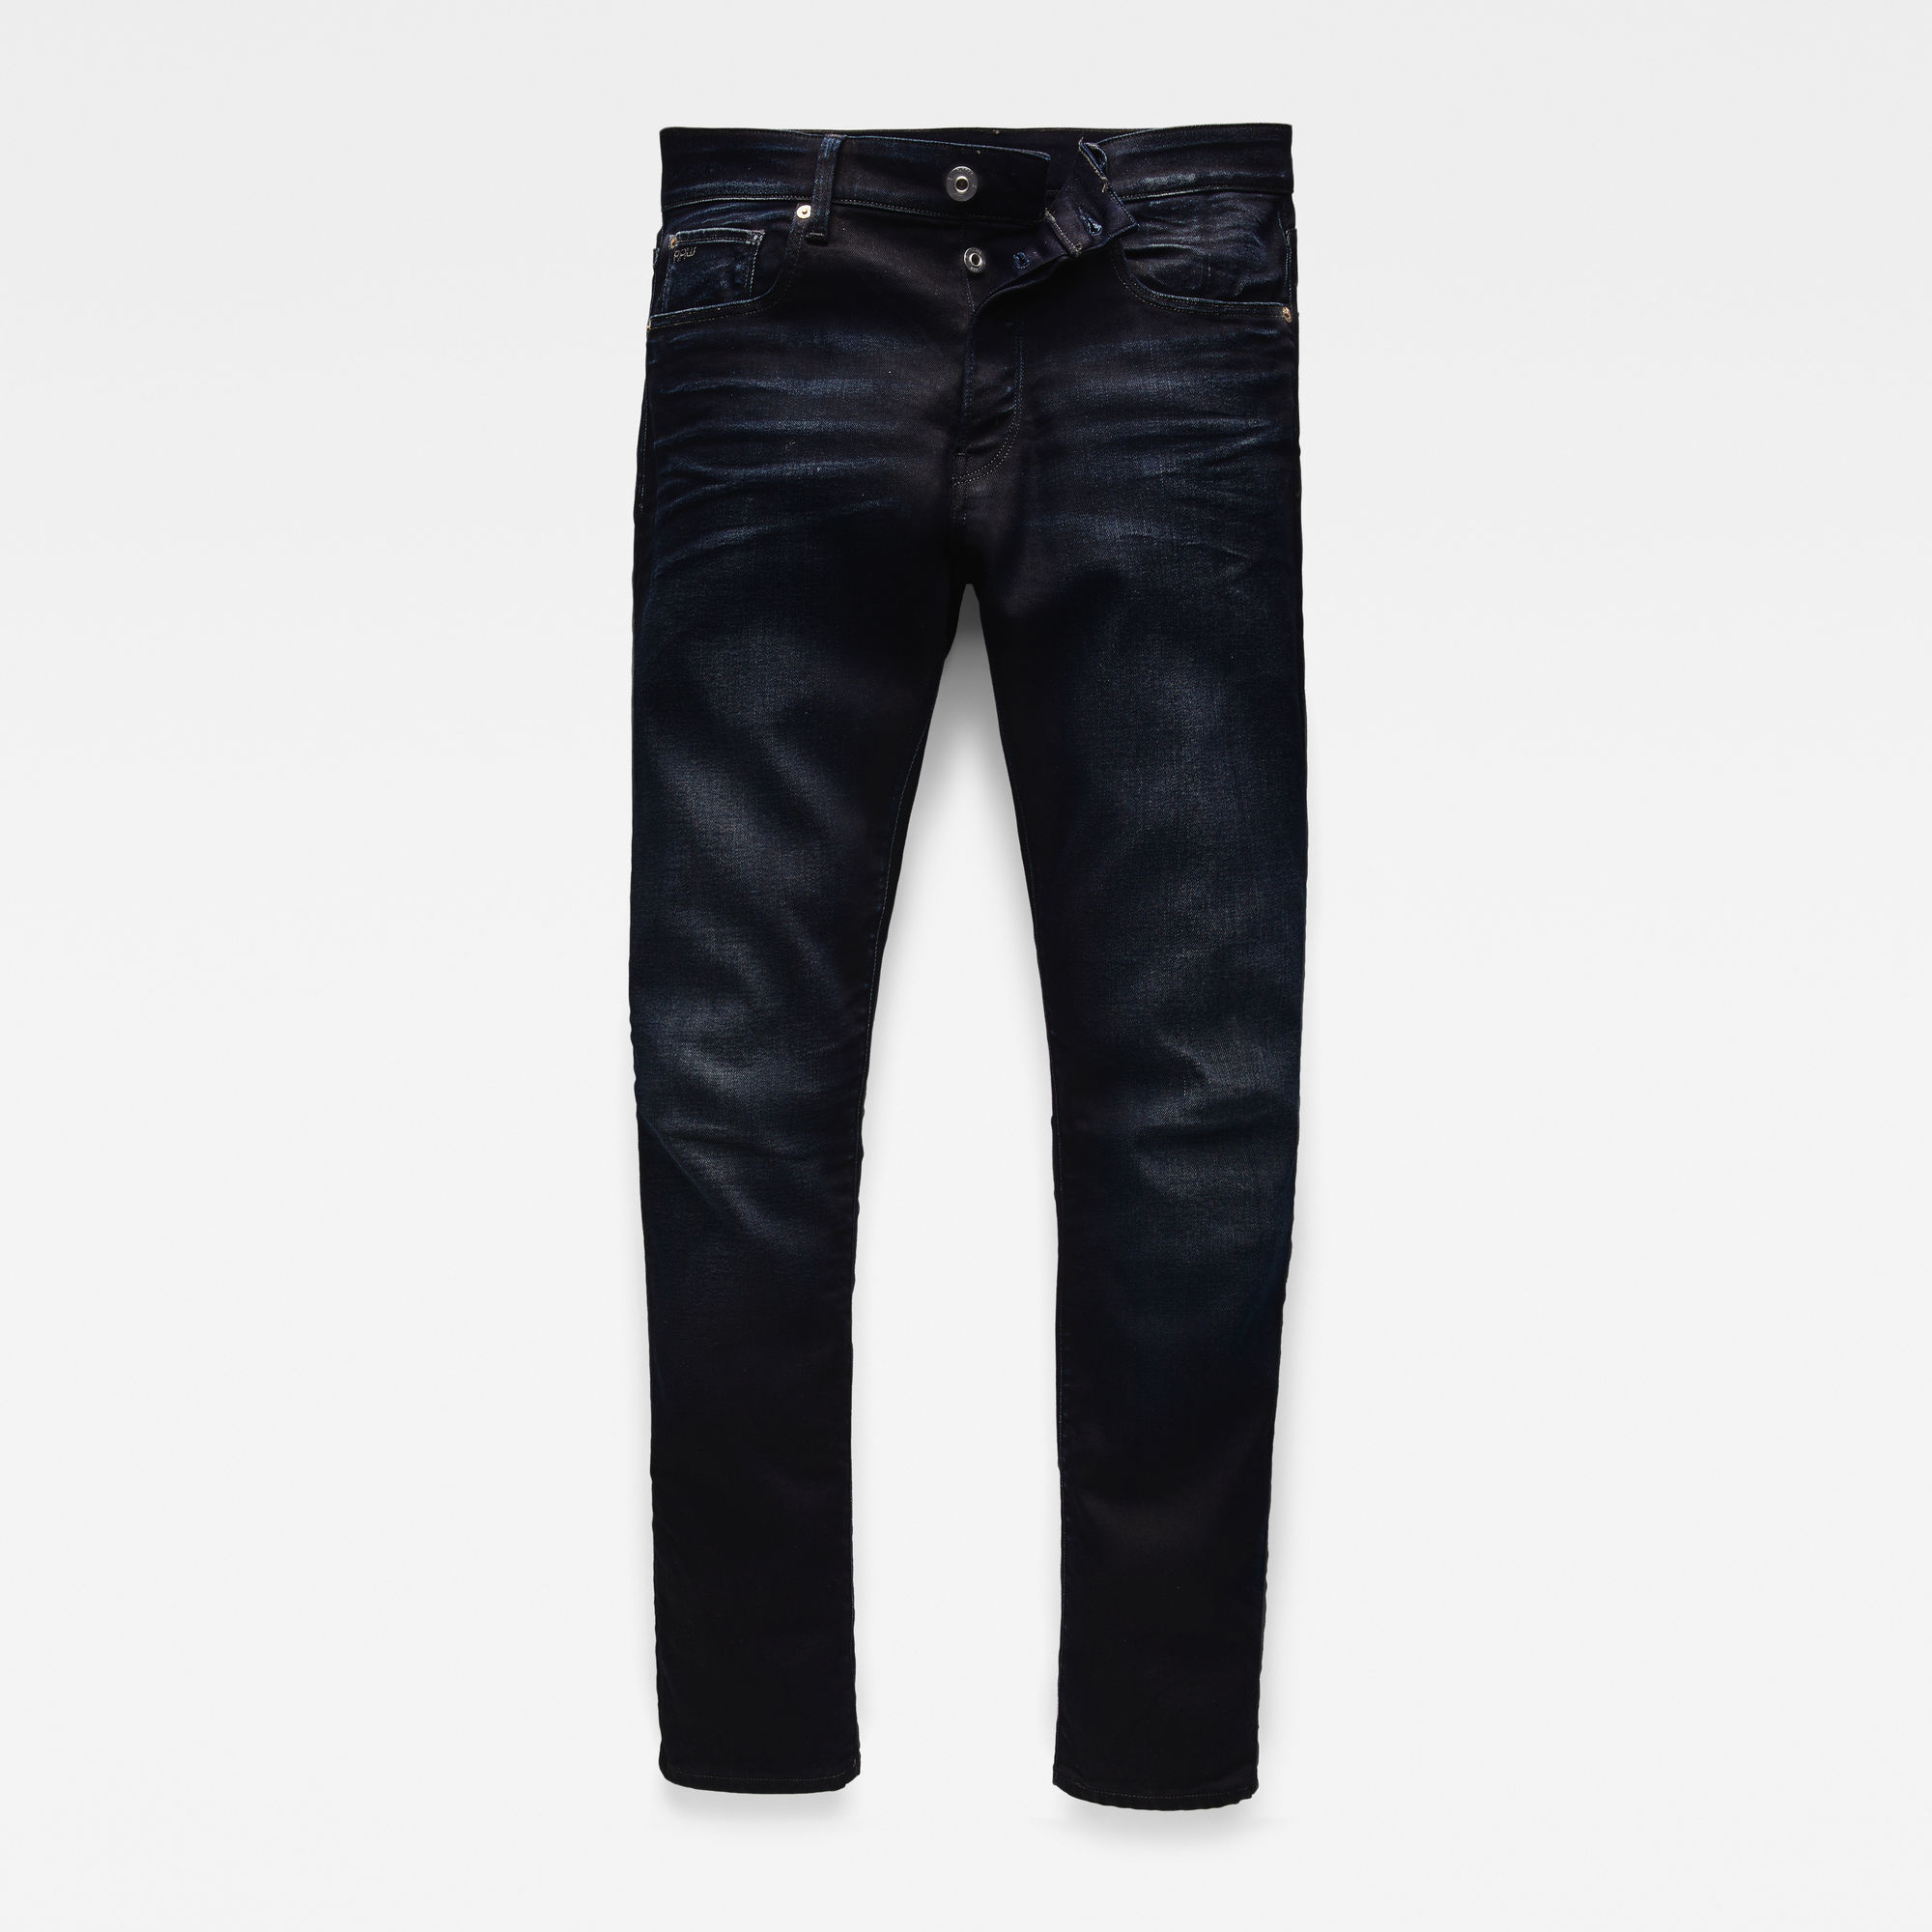 G-STAR 3301 SLIM JEANS - KING Jeans & Casuals